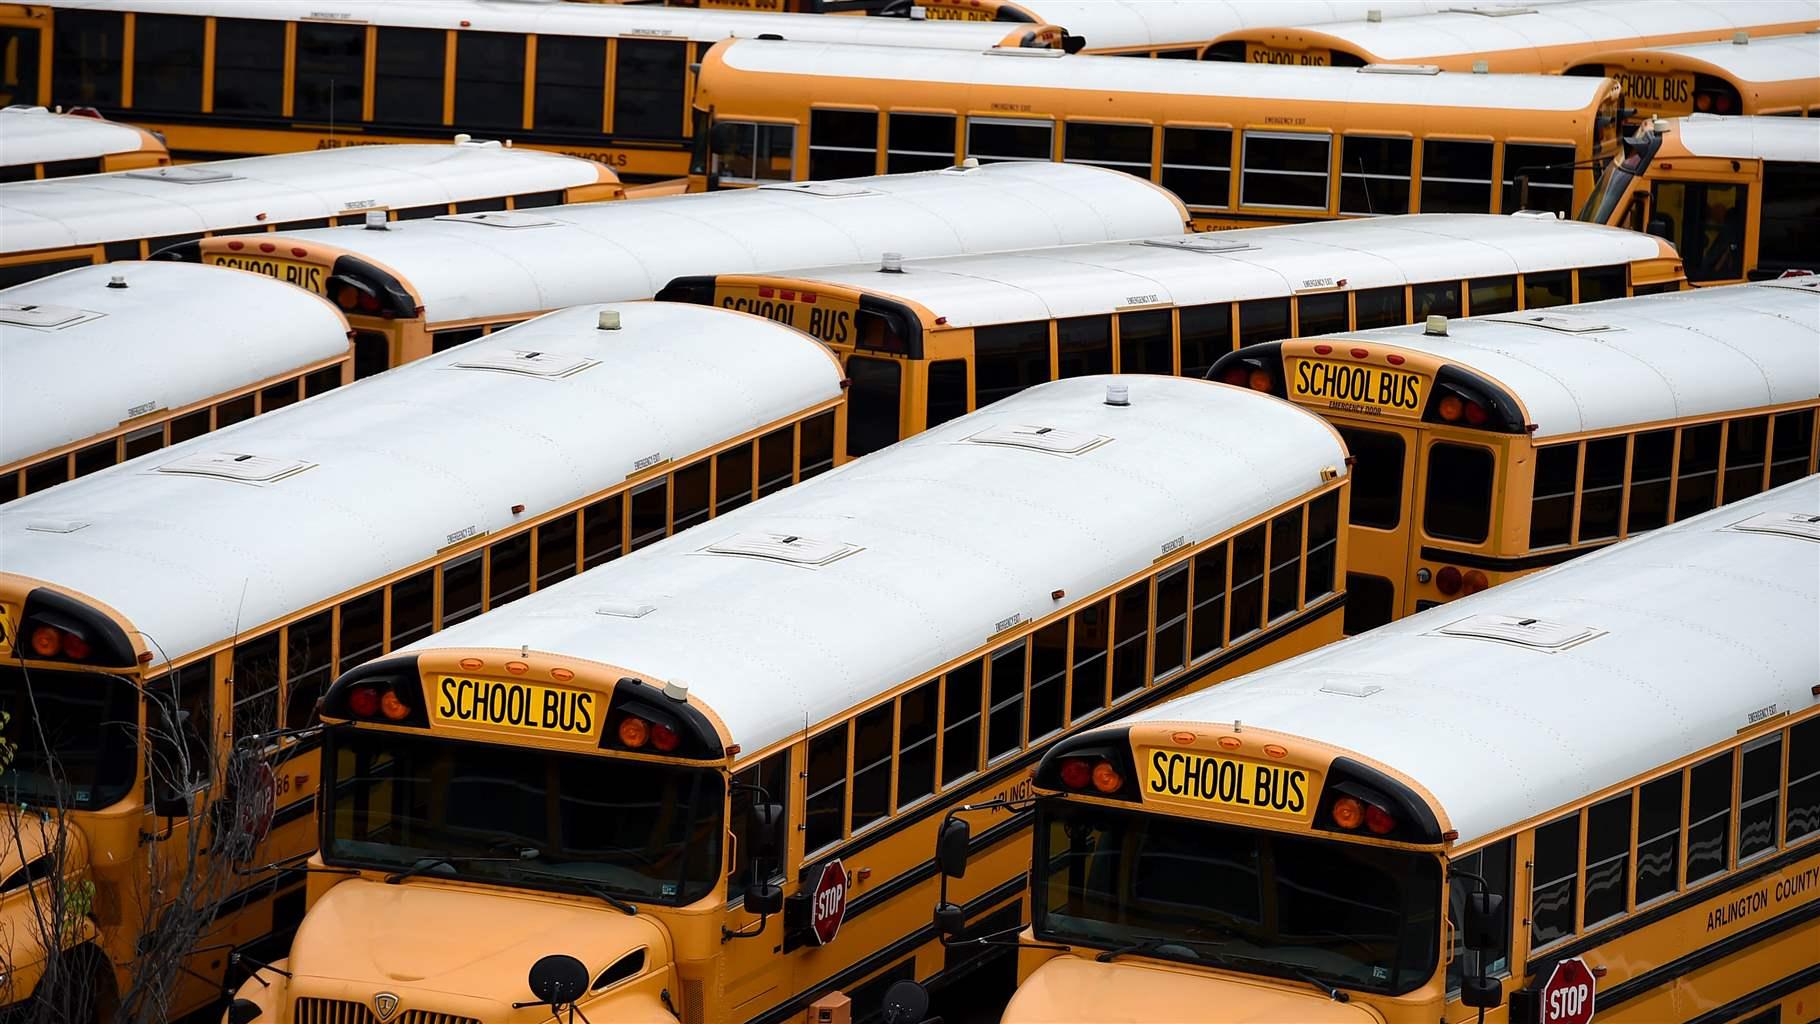 Around two dozen school buses—all parked and empty—crowd a parking lot.